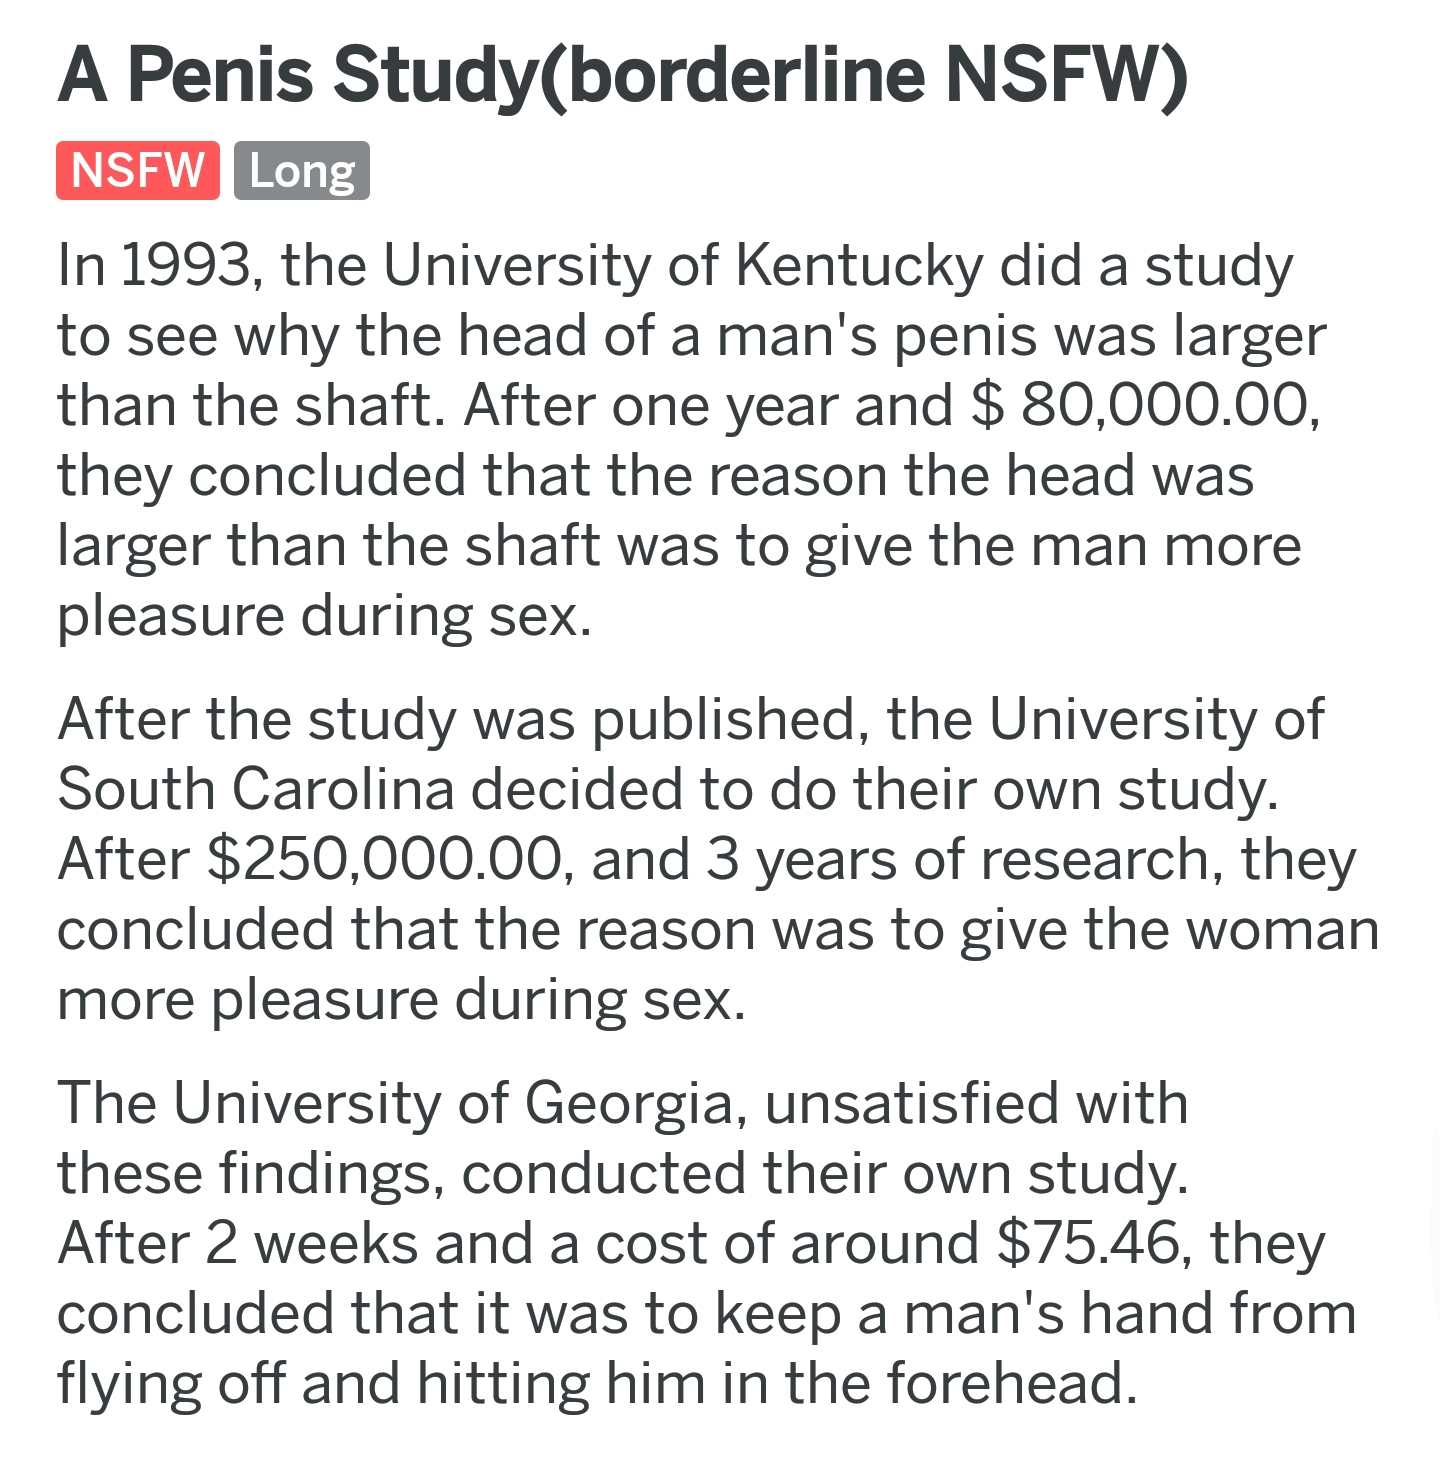 document - A Penis Studyborderline Nsfw Nsfw Long In 1993, the University of Kentucky did a study to see why the head of a man's penis was larger than the shaft. After one year and $ 80,000.00 they concluded that the reason the head was larger than the sh